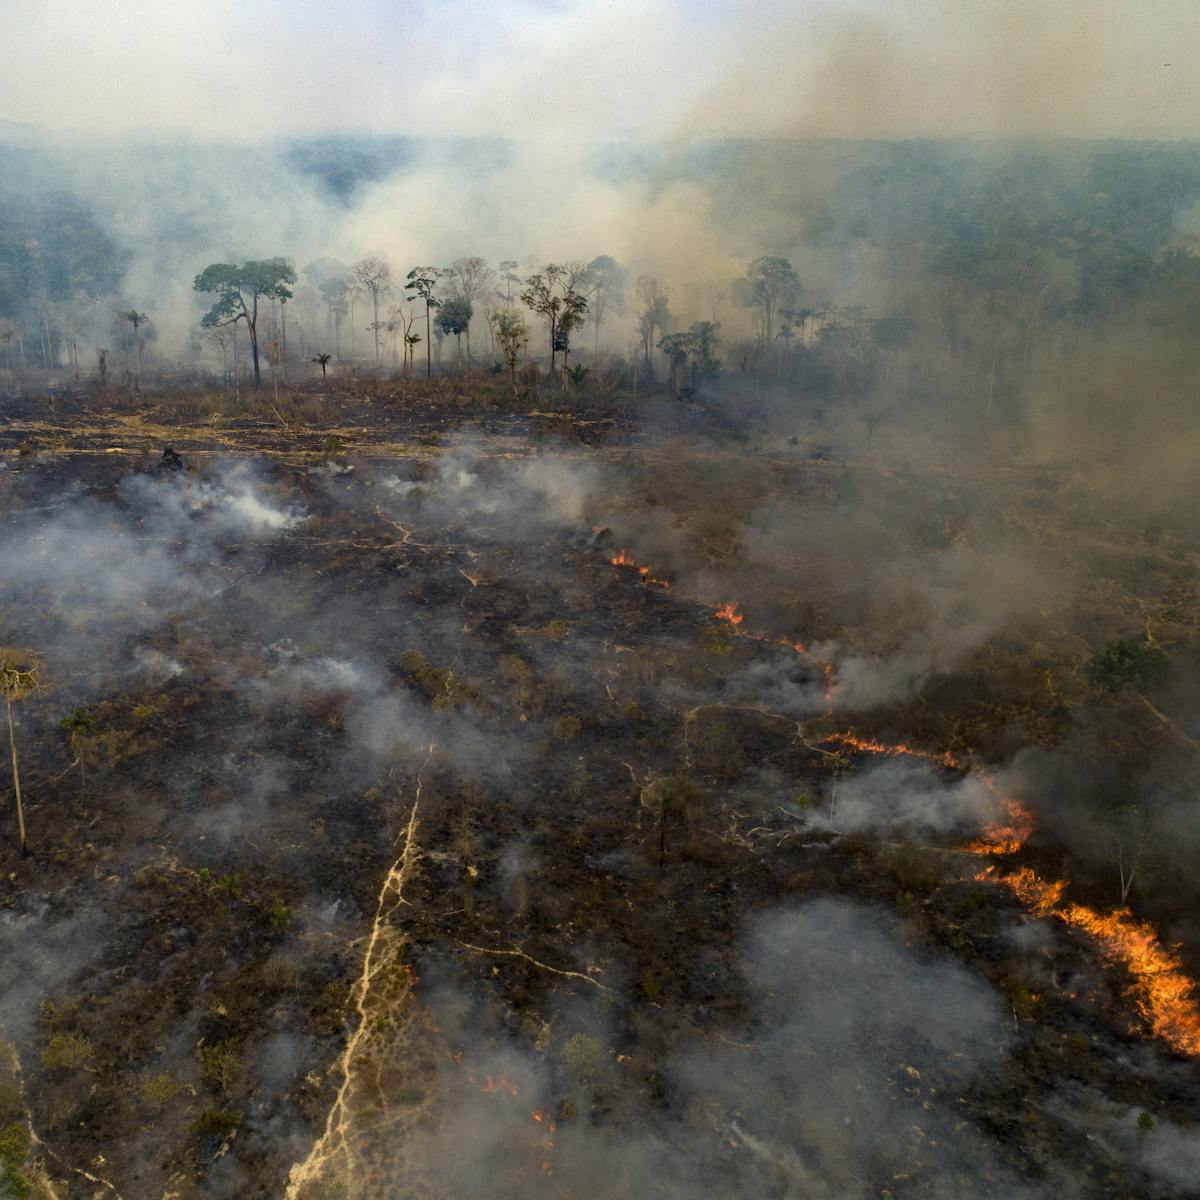 Historic Amazon Rainforest Fires Threaten Climate And Raise Risk Of New Diseases